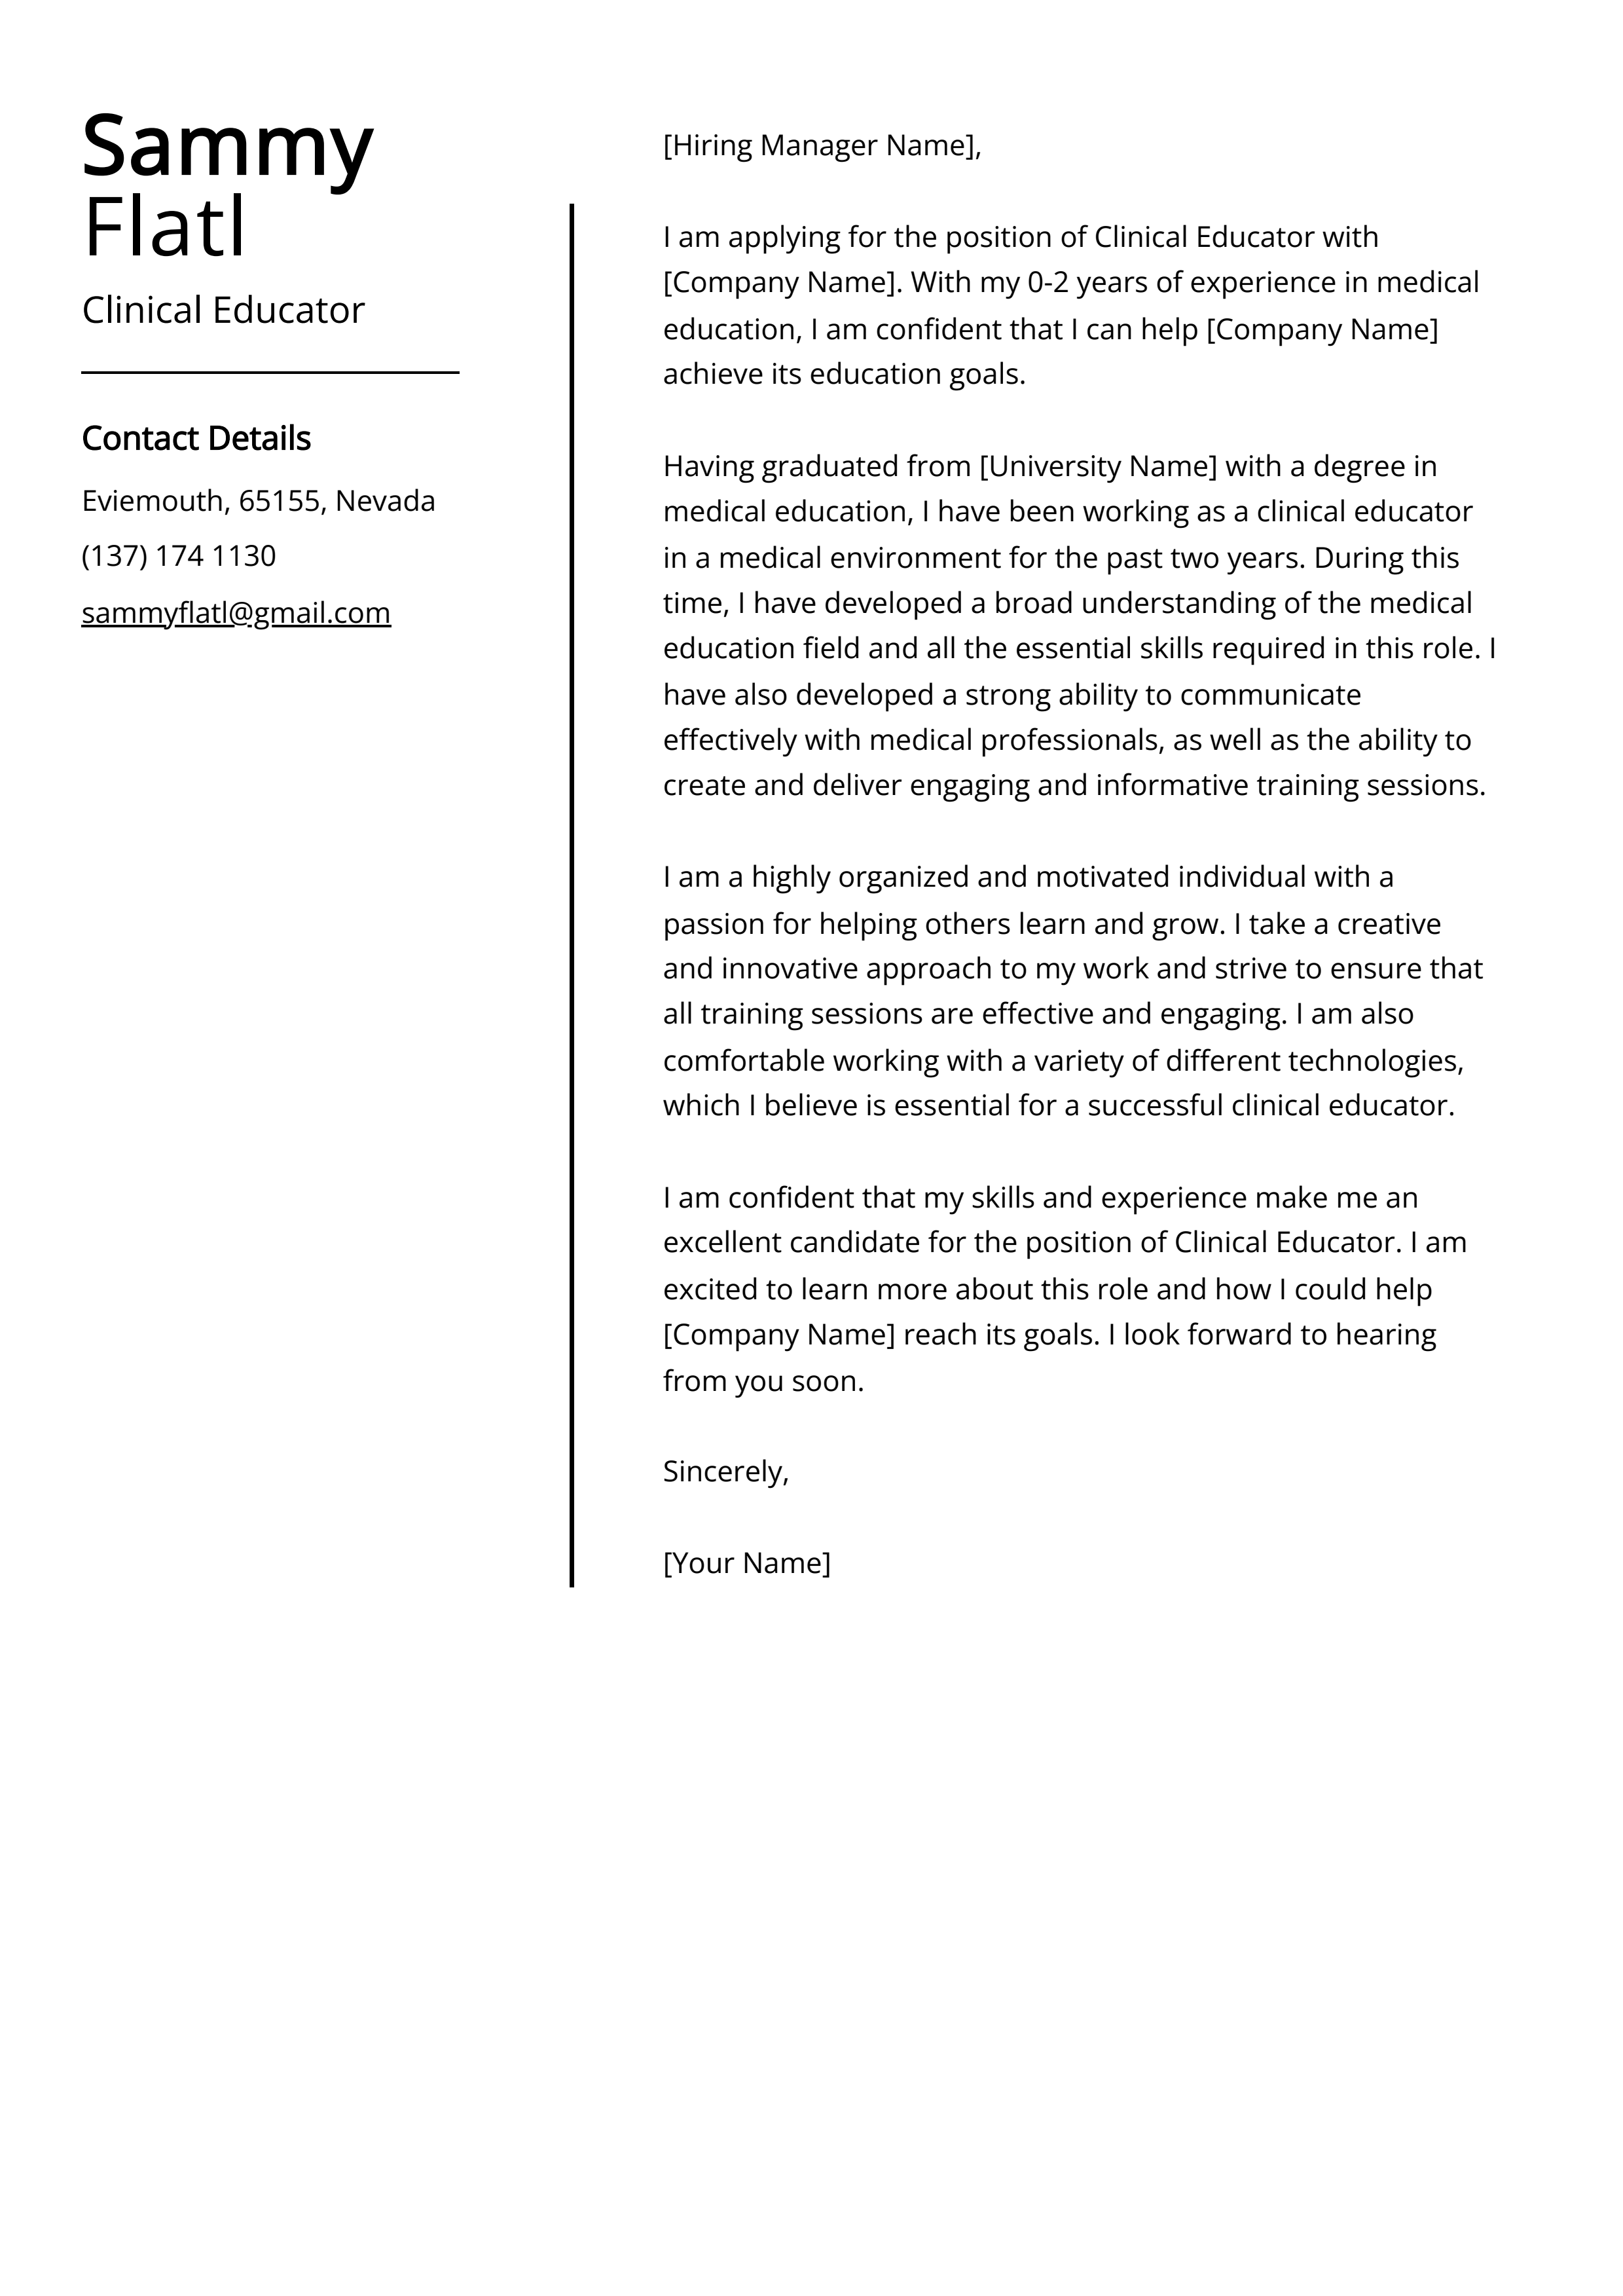 Clinical Educator Cover Letter Example